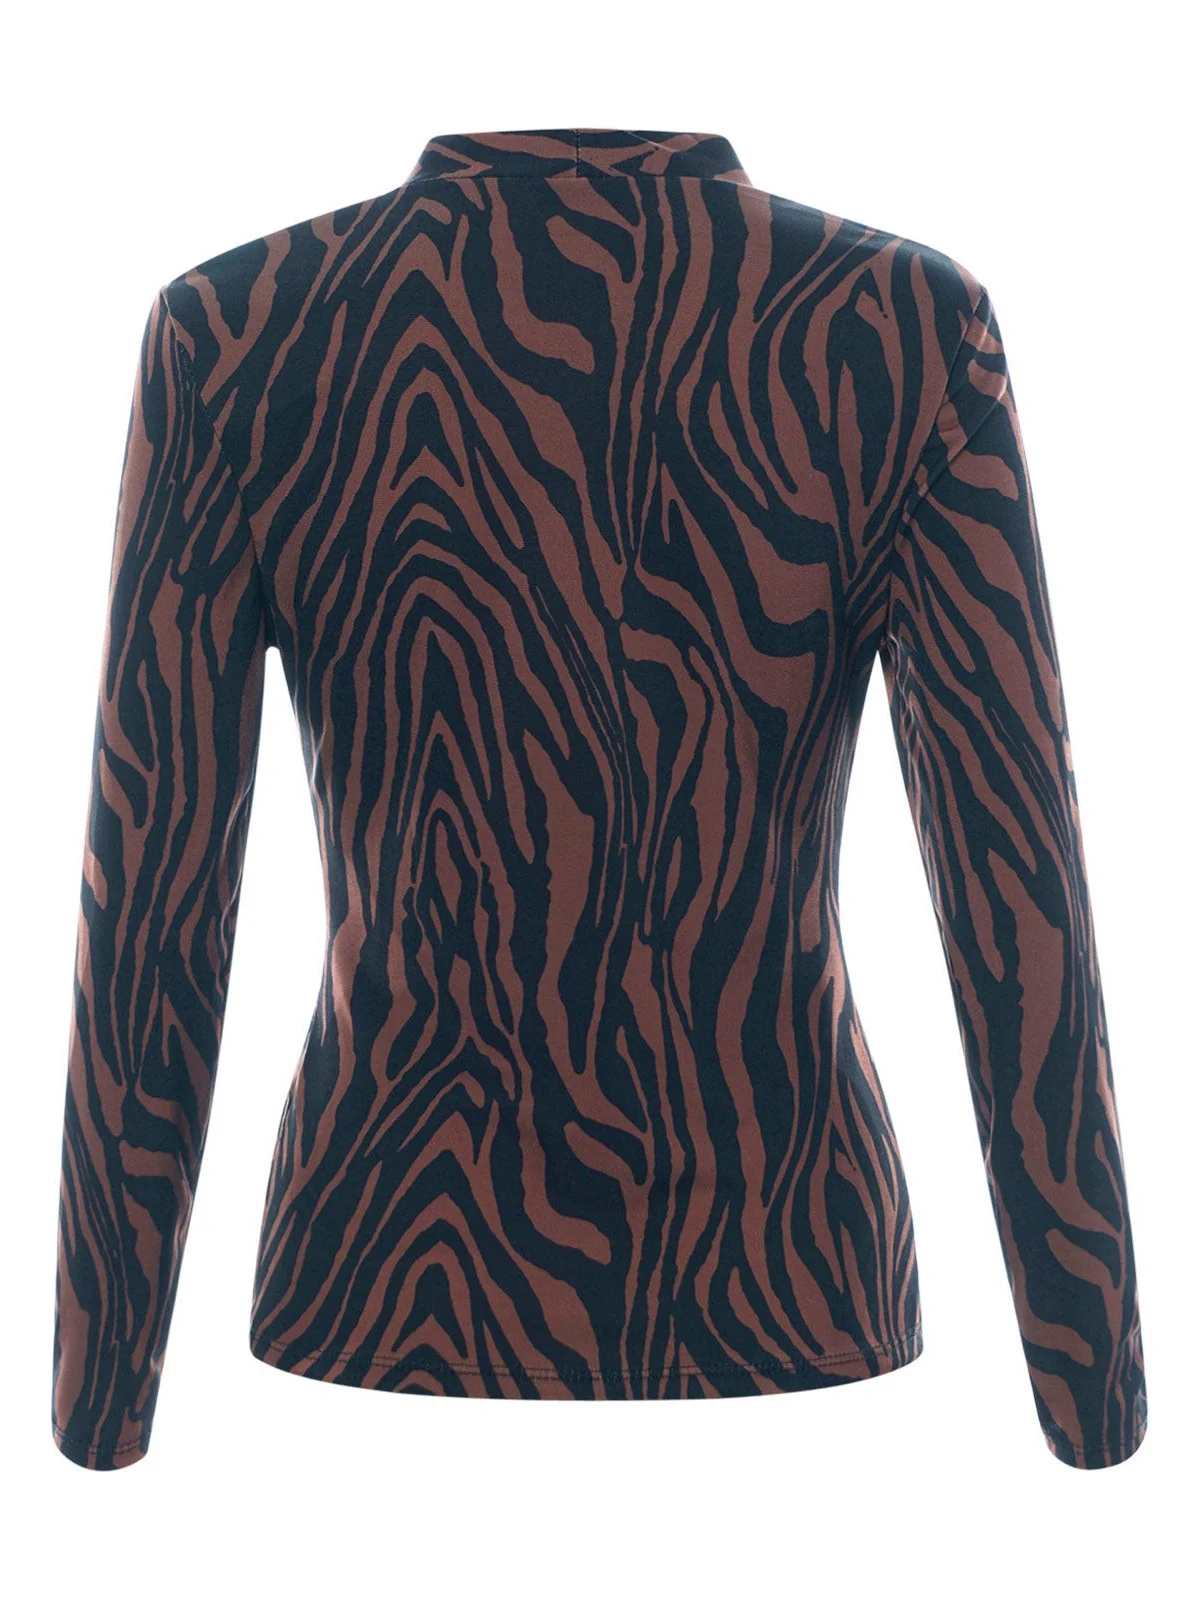 Tops, bodysuits and shirts - Twisted Knot Top Caroline - Brown with Tiger Print